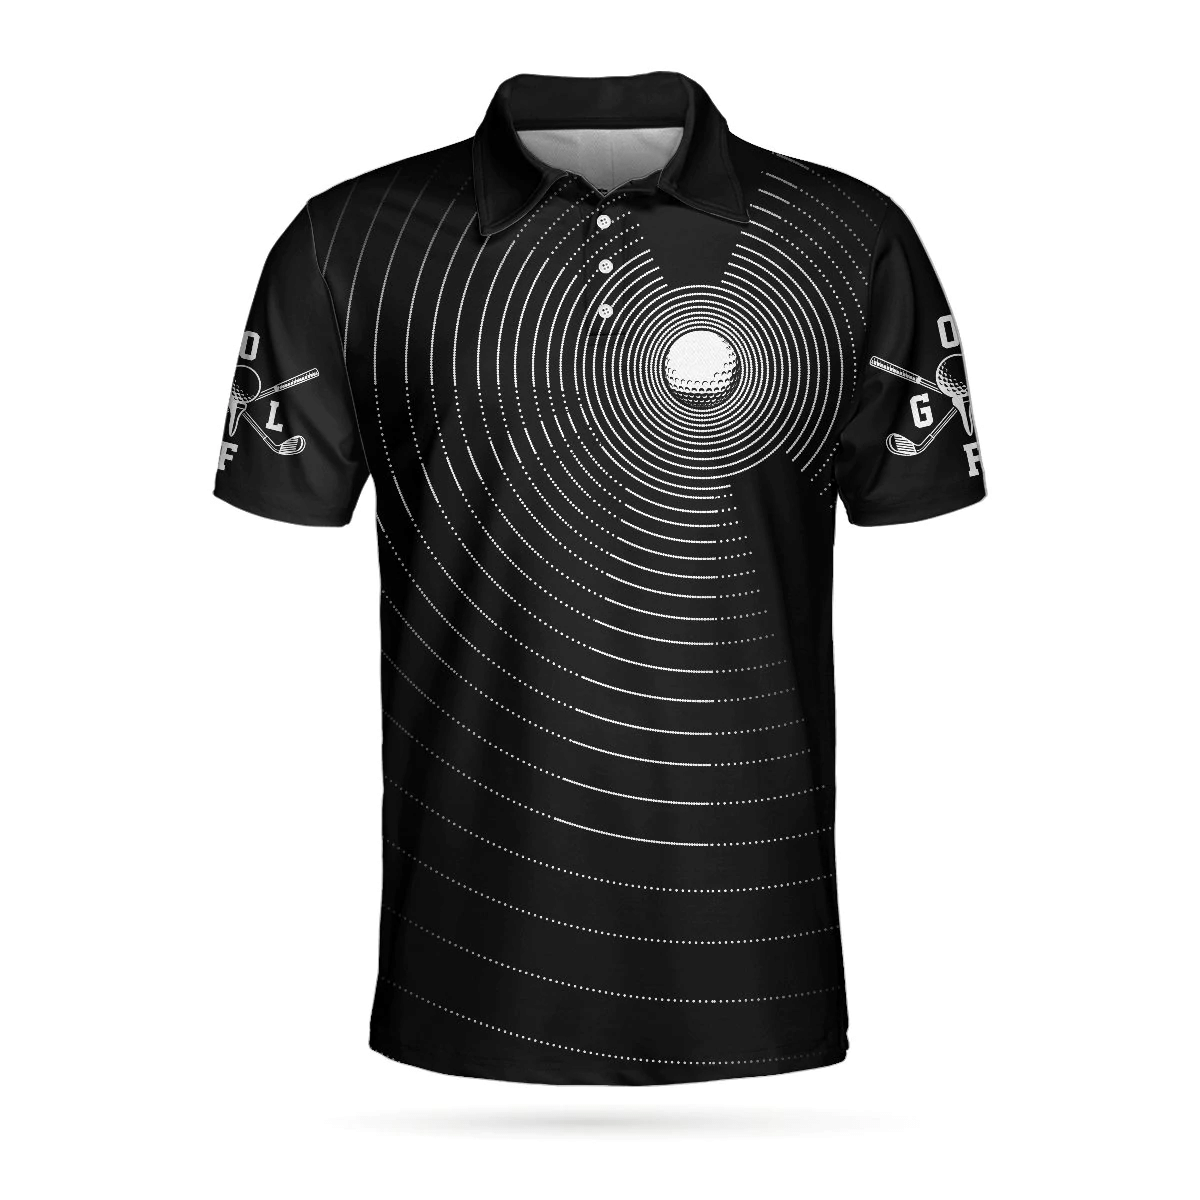 3D Effect Gold Ball And Golfer All Over Print Polo Shirt For Men Best Golf Shirts Short Sleeve Polo For Men